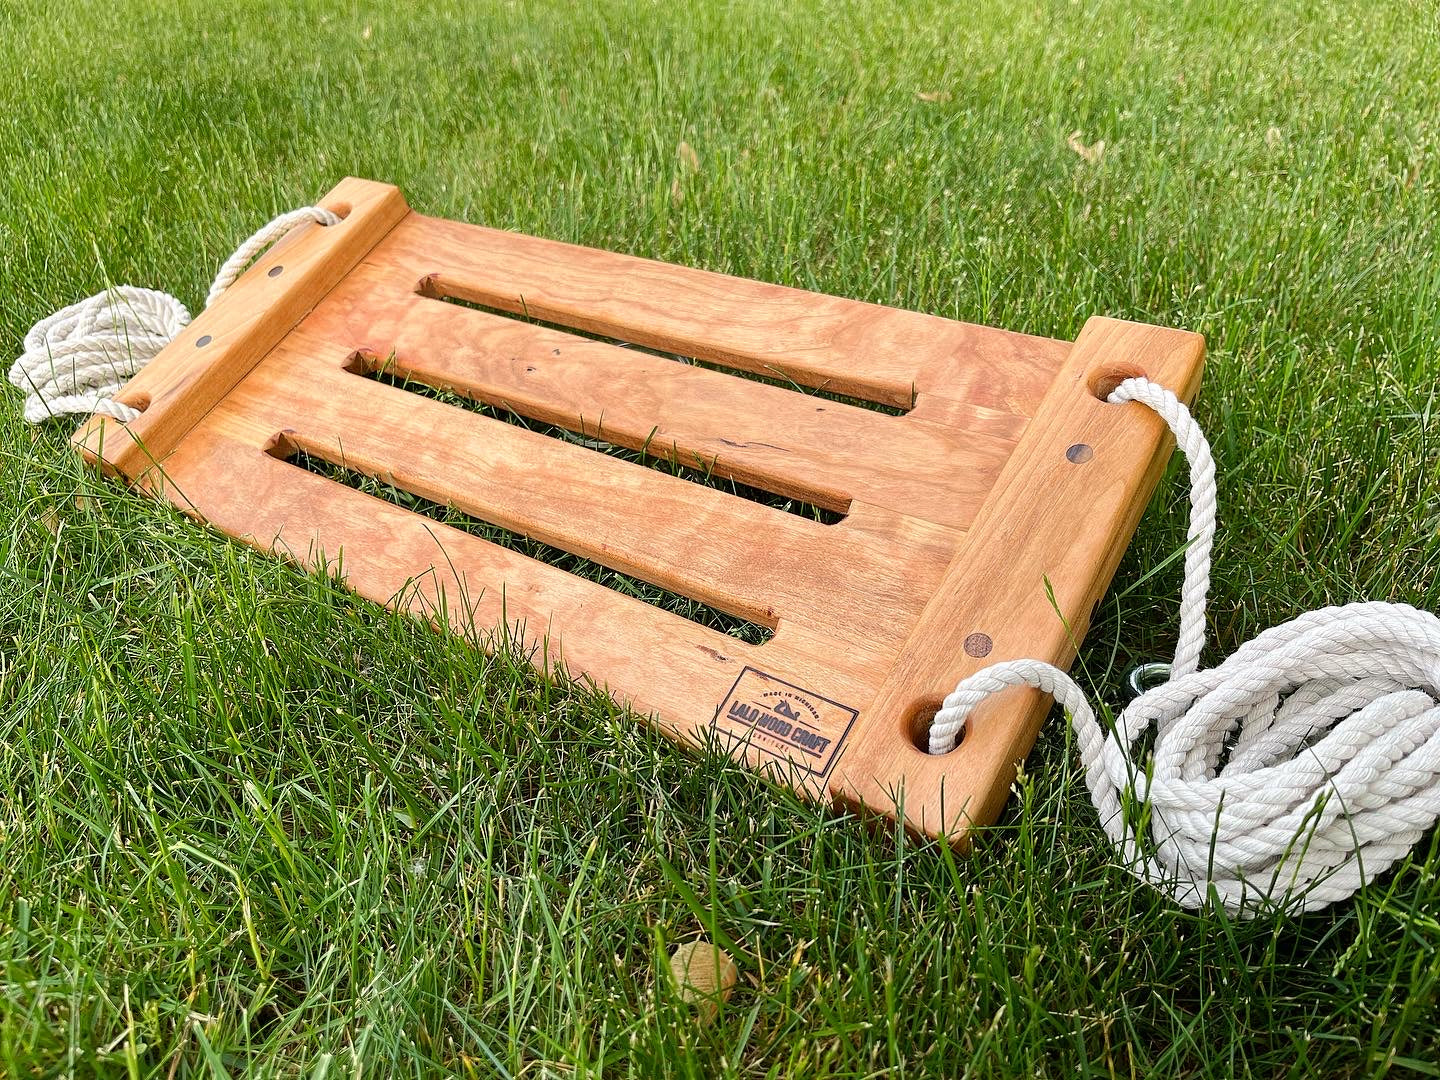 Swing seat with hanging straps